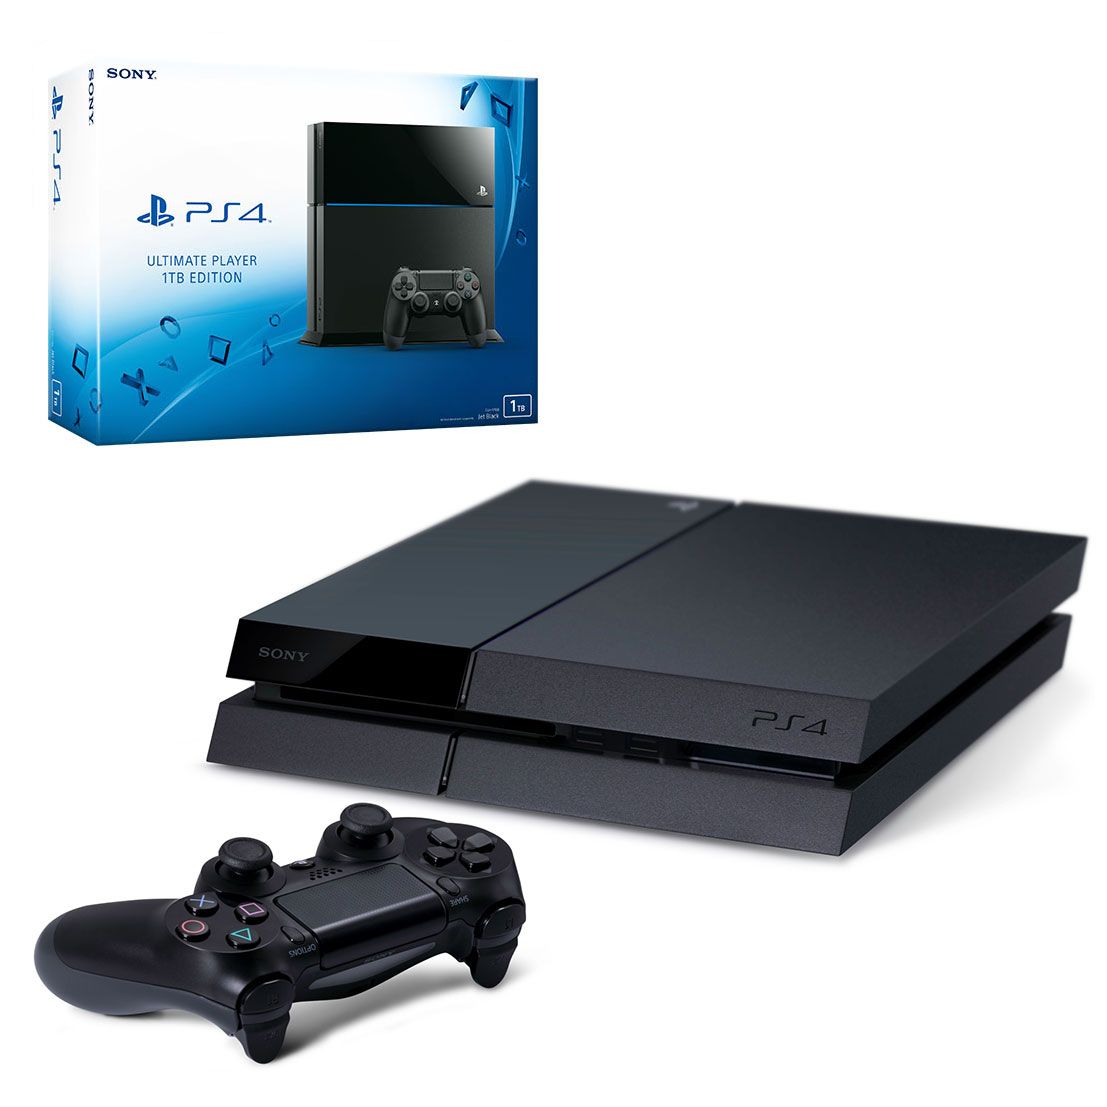 Ps4 Ultimate Player 1tb. Ps4 Ultimate Edition 1tb. Стационарная приставка ps4. Sony PLAYSTATION 1000. Ps4 ultimate edition